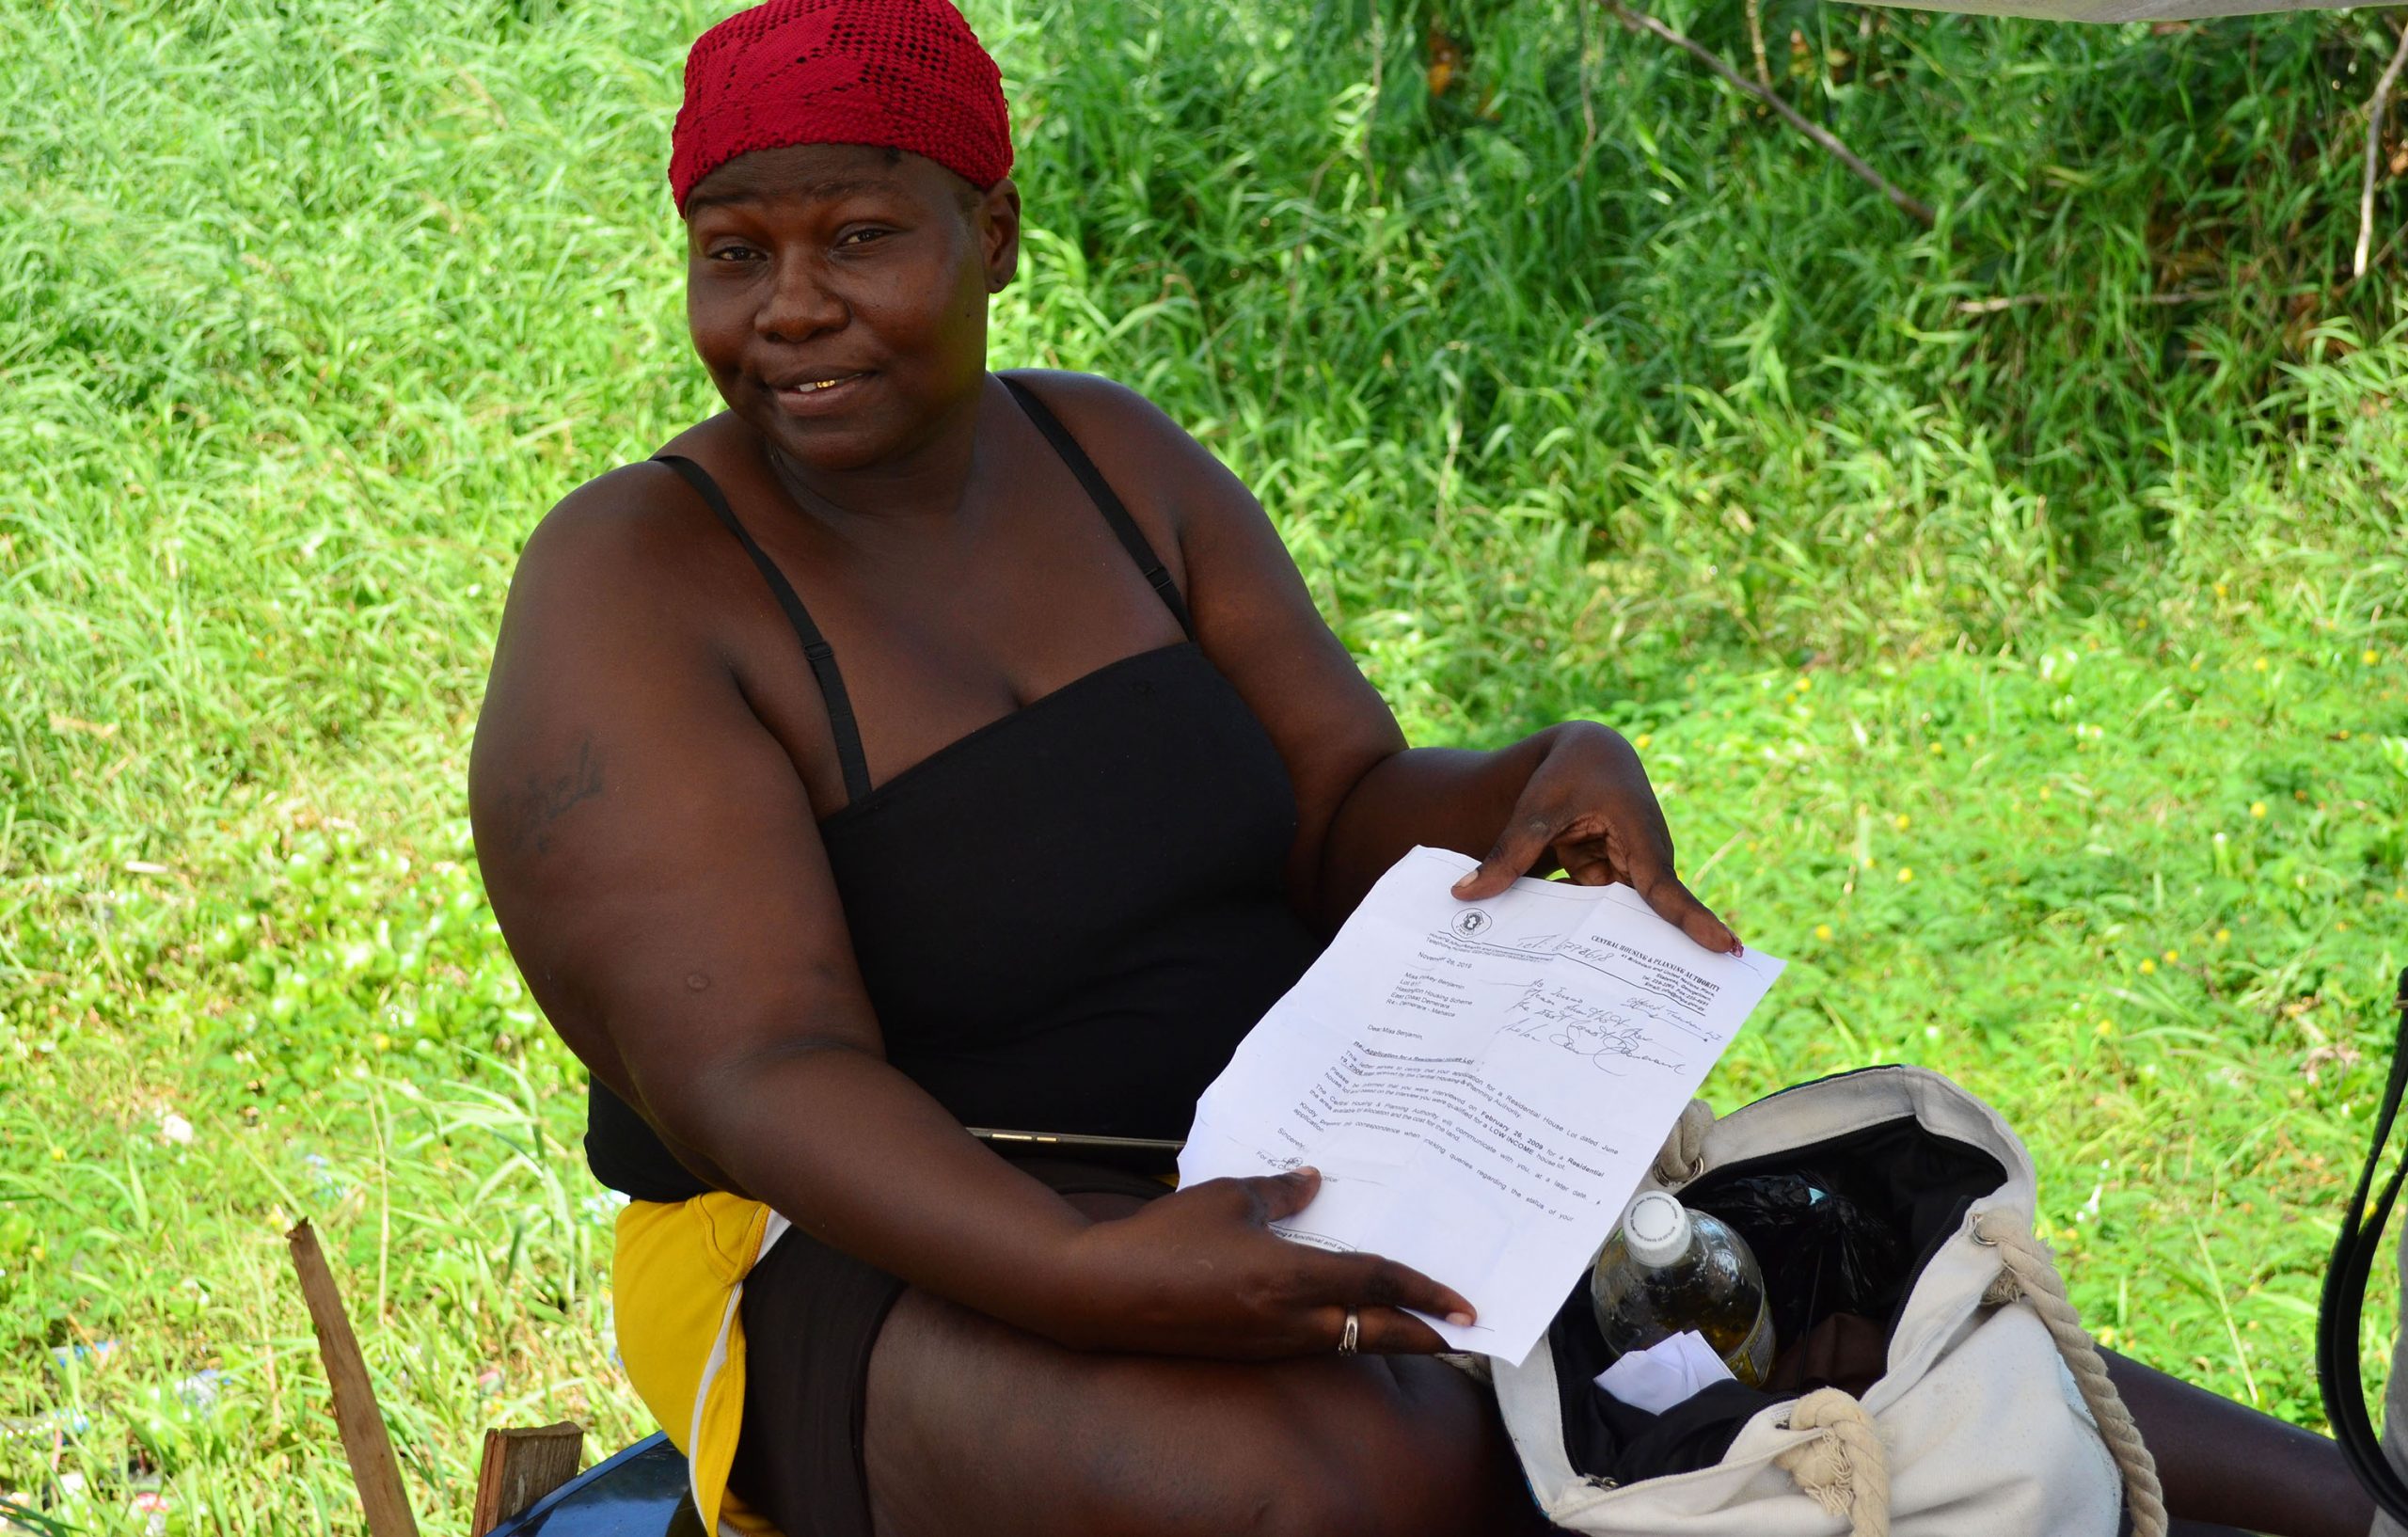 Pinkey Benjamin displaying her letter from the Central Planning and Housing Authority after she applied for a house lot in 2006 (Photo by Orlando Charles)